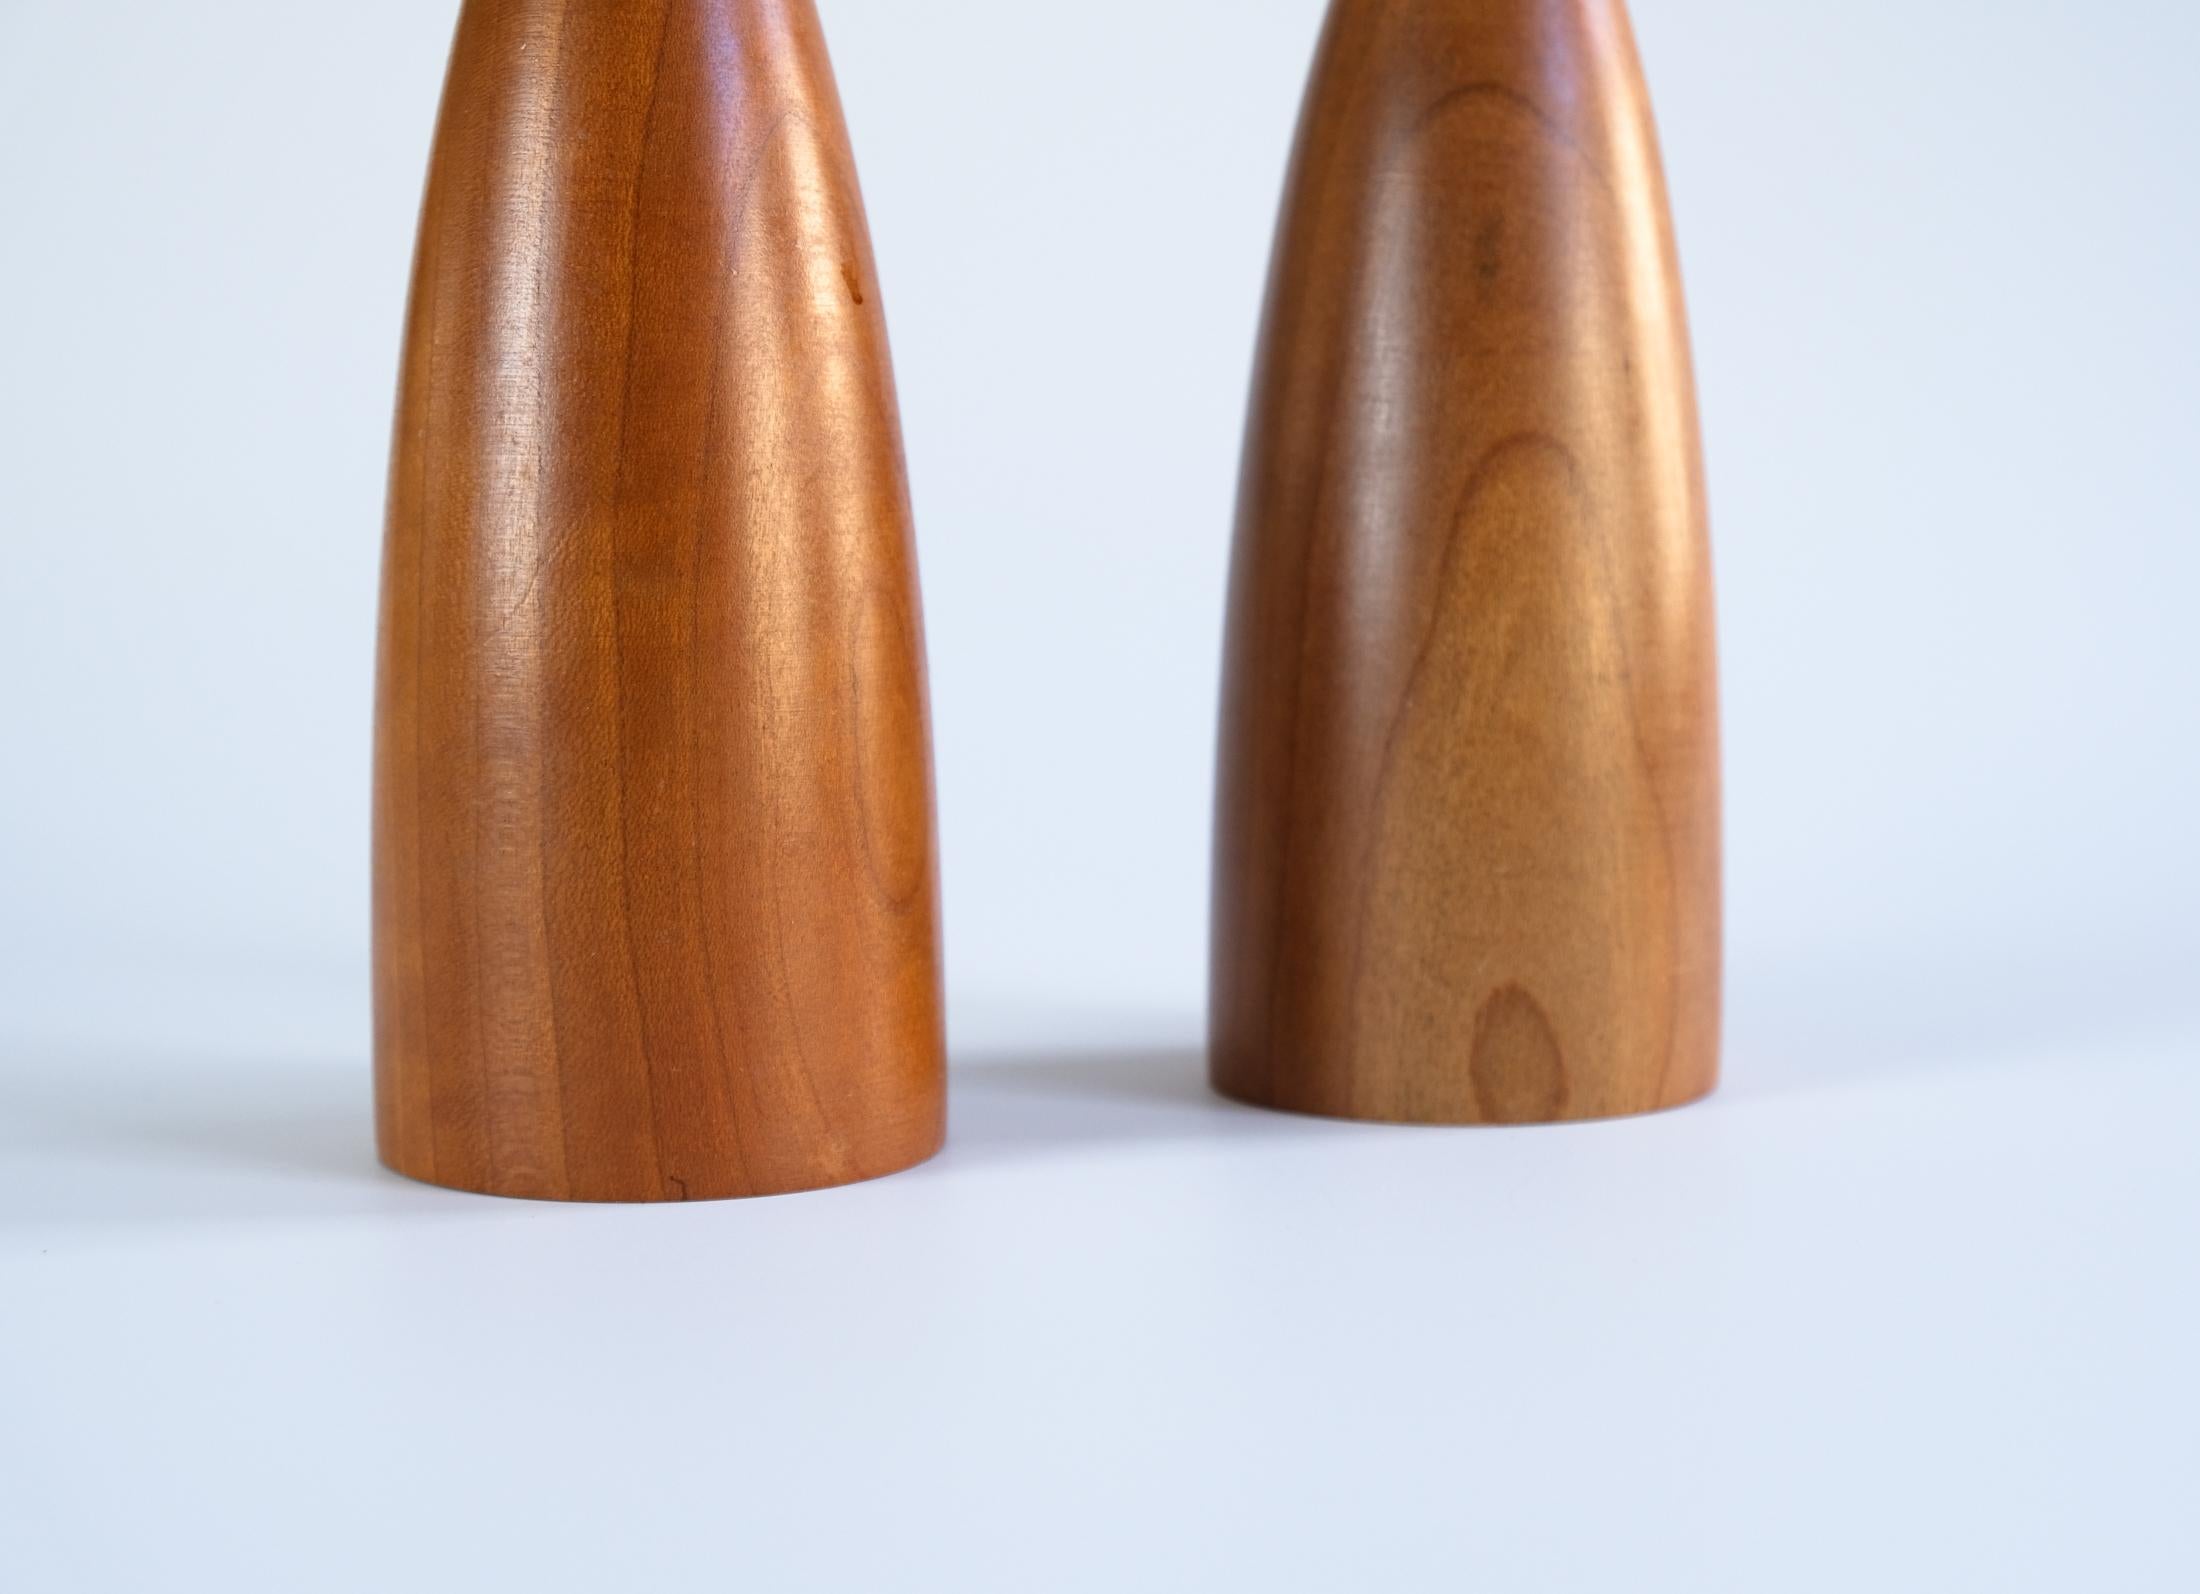 Wood Pair of Mid-Century Modernist Danish Style Candlesticks / Candle Holders, 1960s